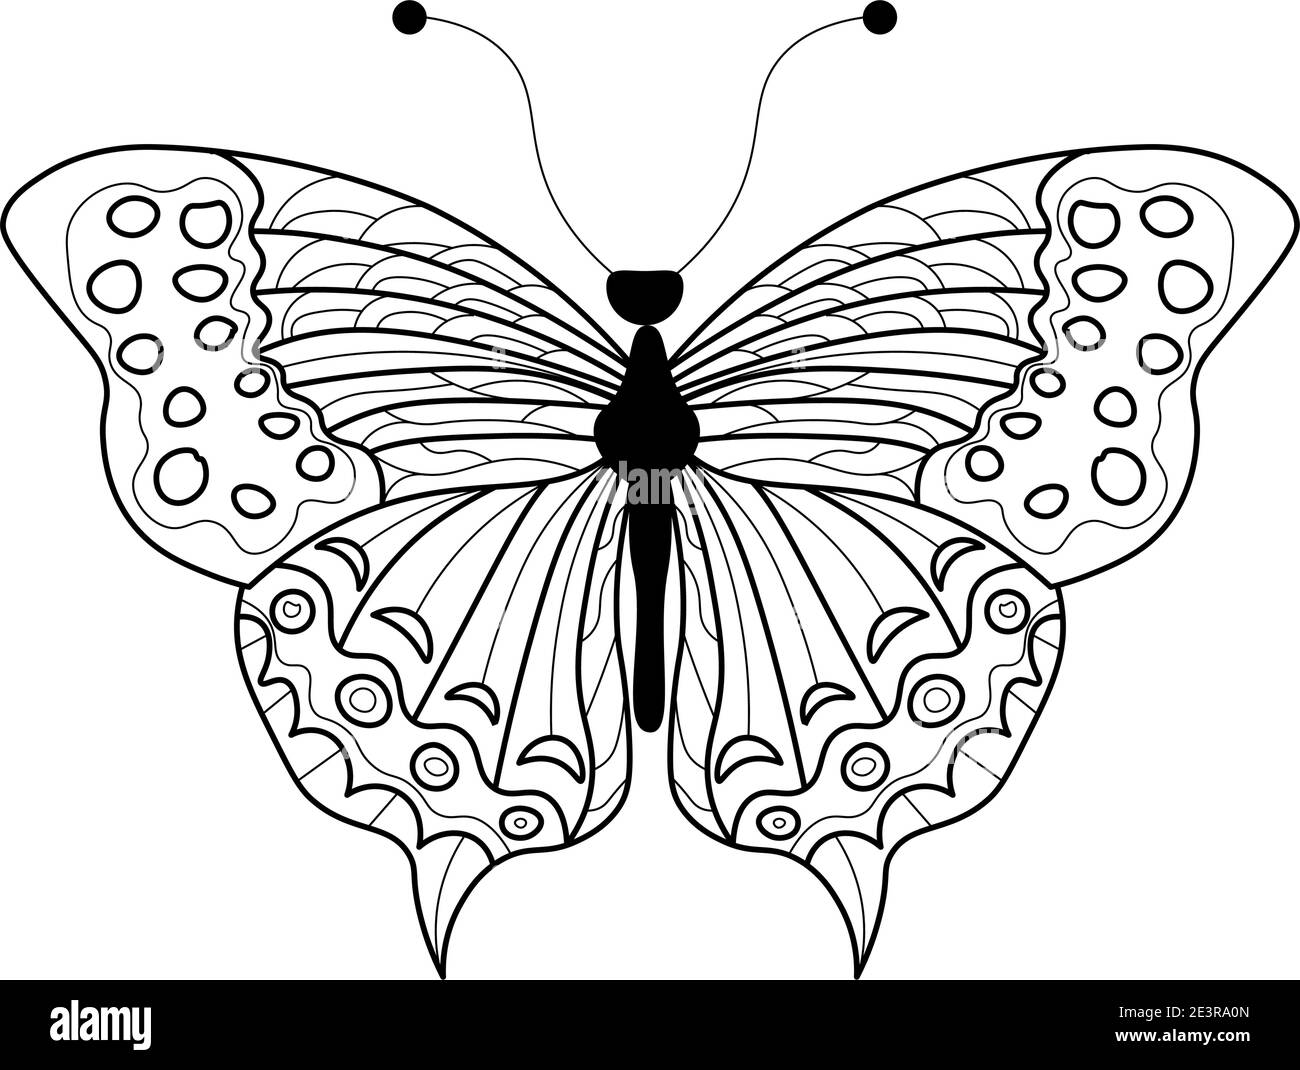 Butterfly coloring book. Linear drawing of a butterfly Stock ...